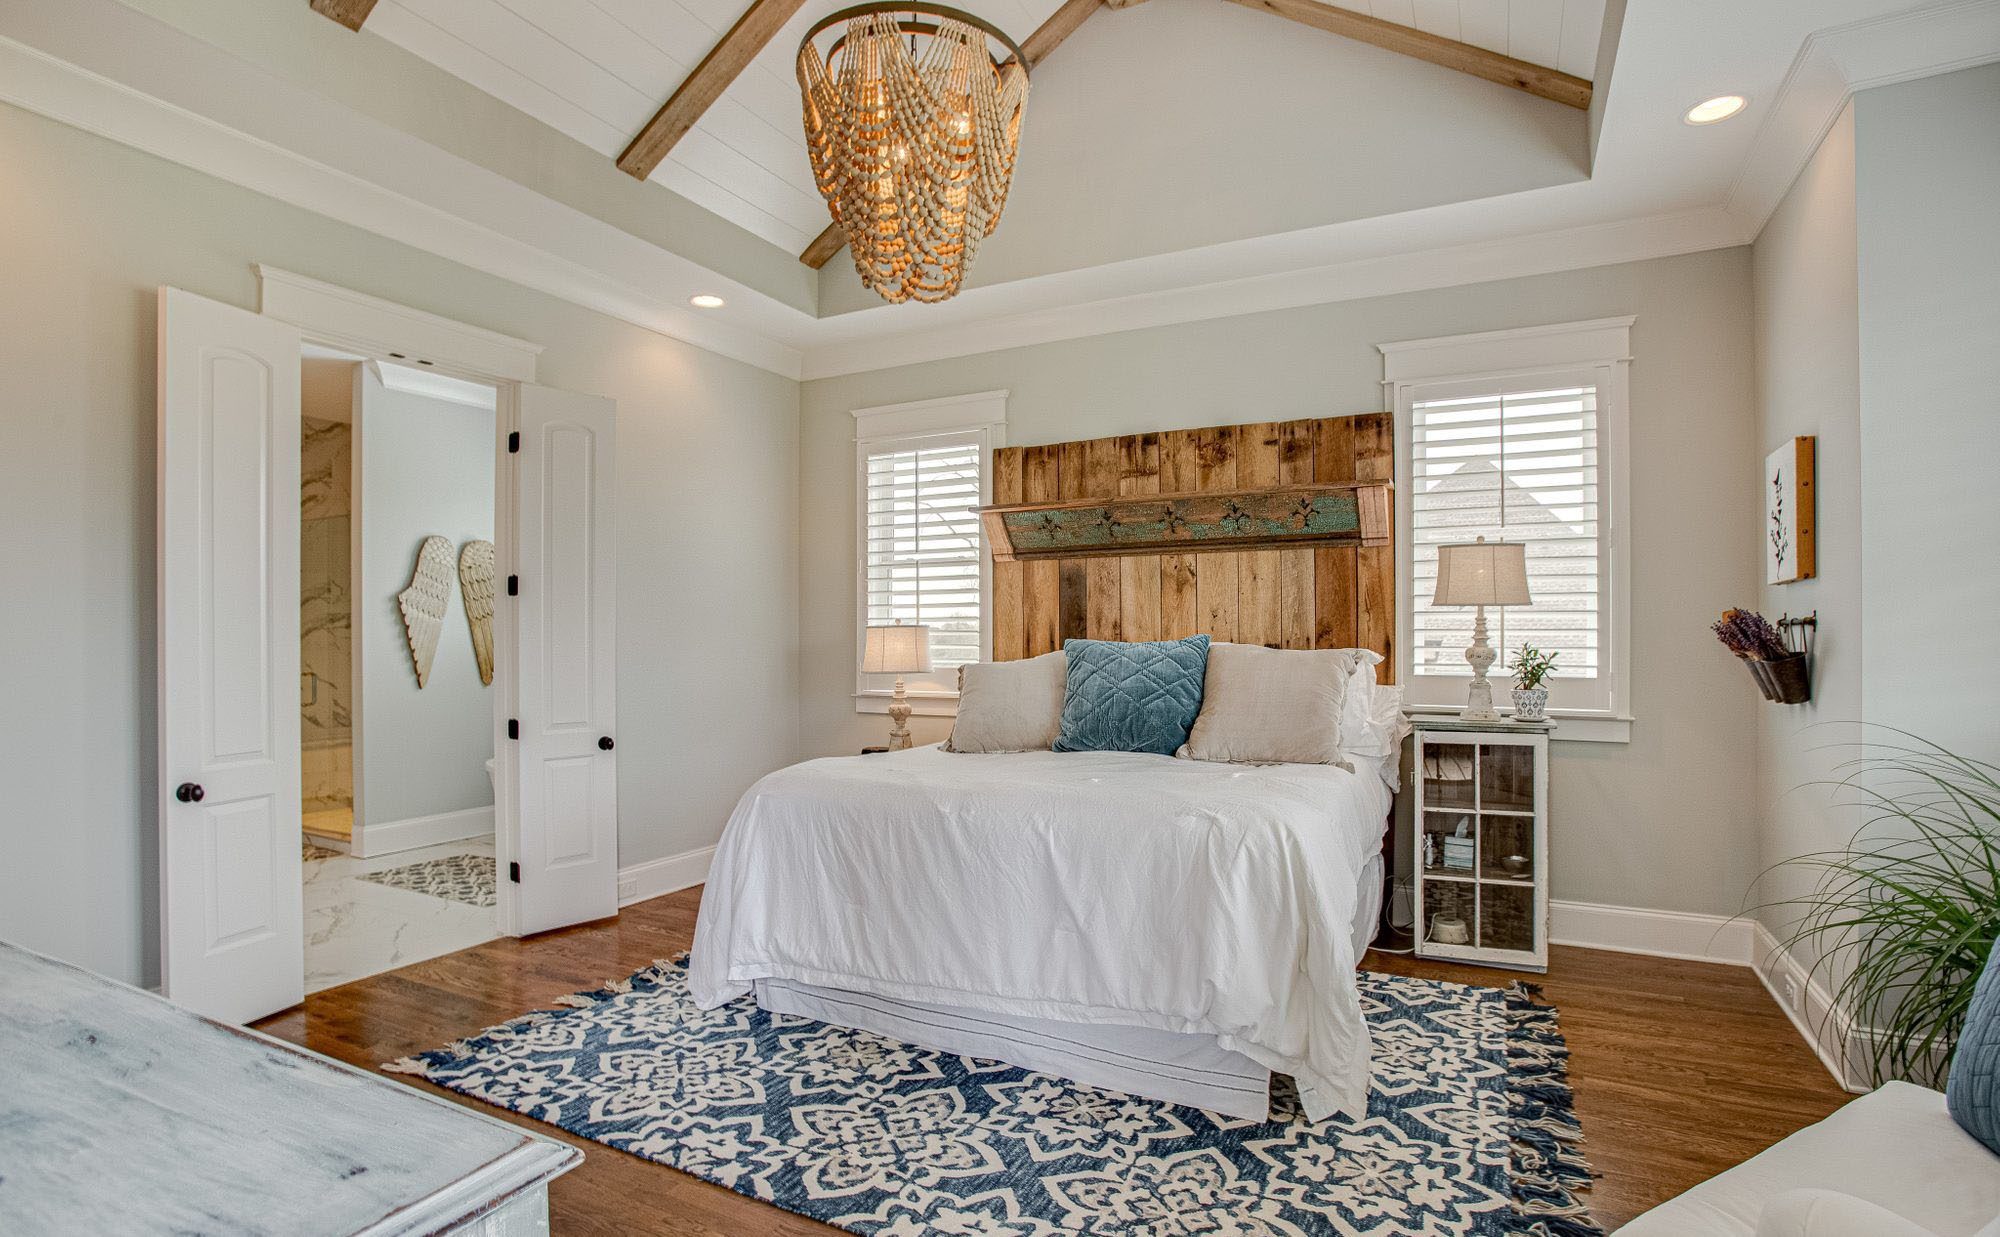 Bedroom vaulted ceilings with exposed timber beams and shiplap.